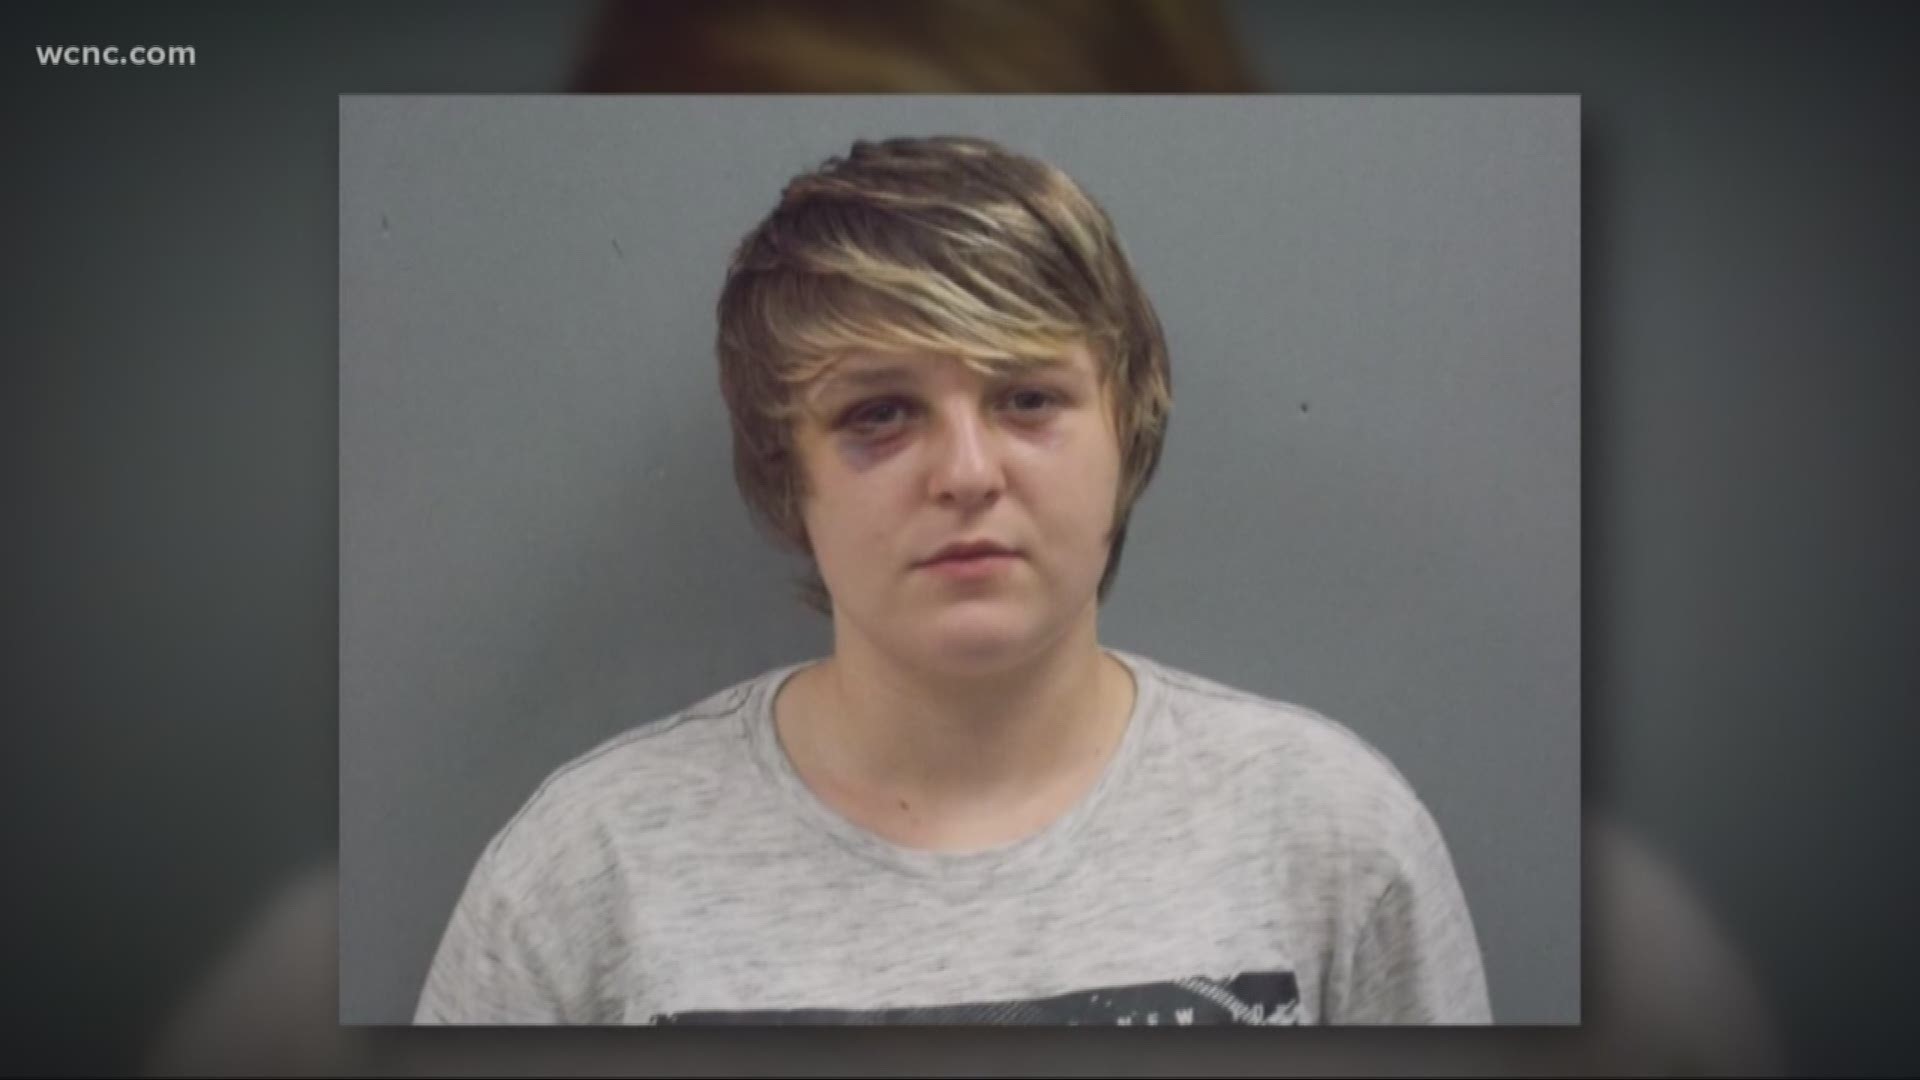 A 19-year-old mother is charged with the murder of her 11-month-old baby.